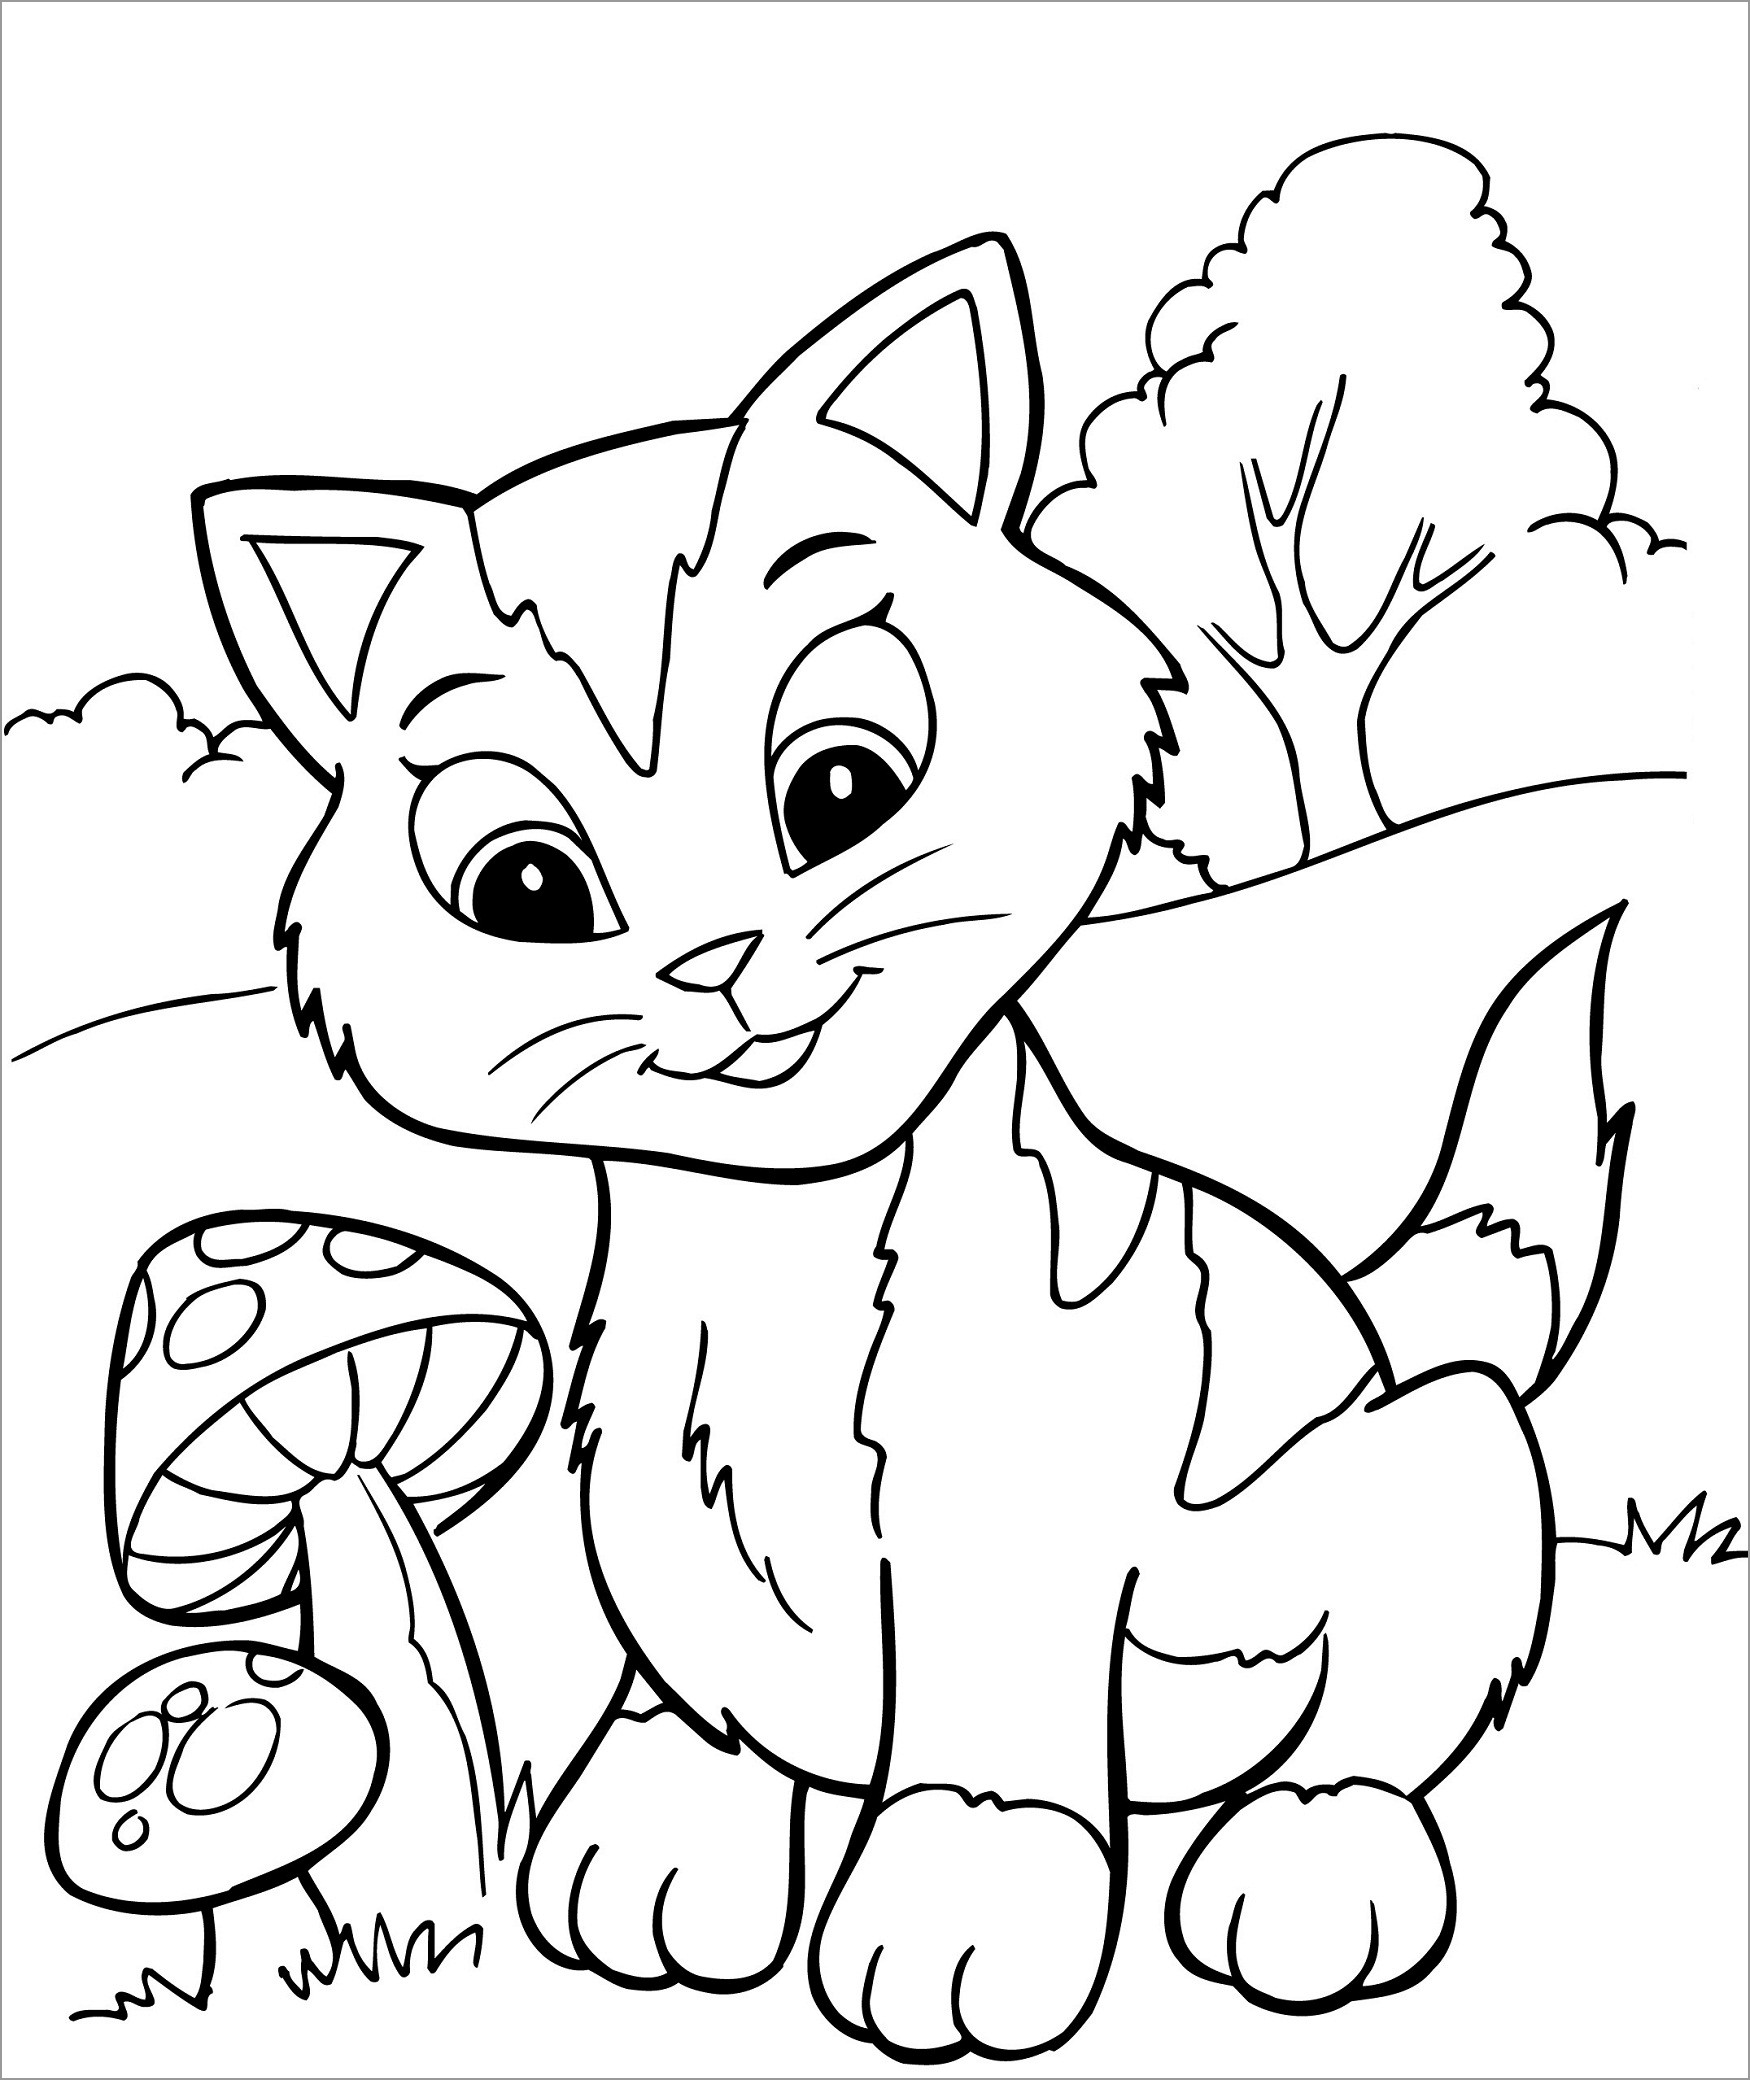 Cute Kitten Coloring Pages to Print